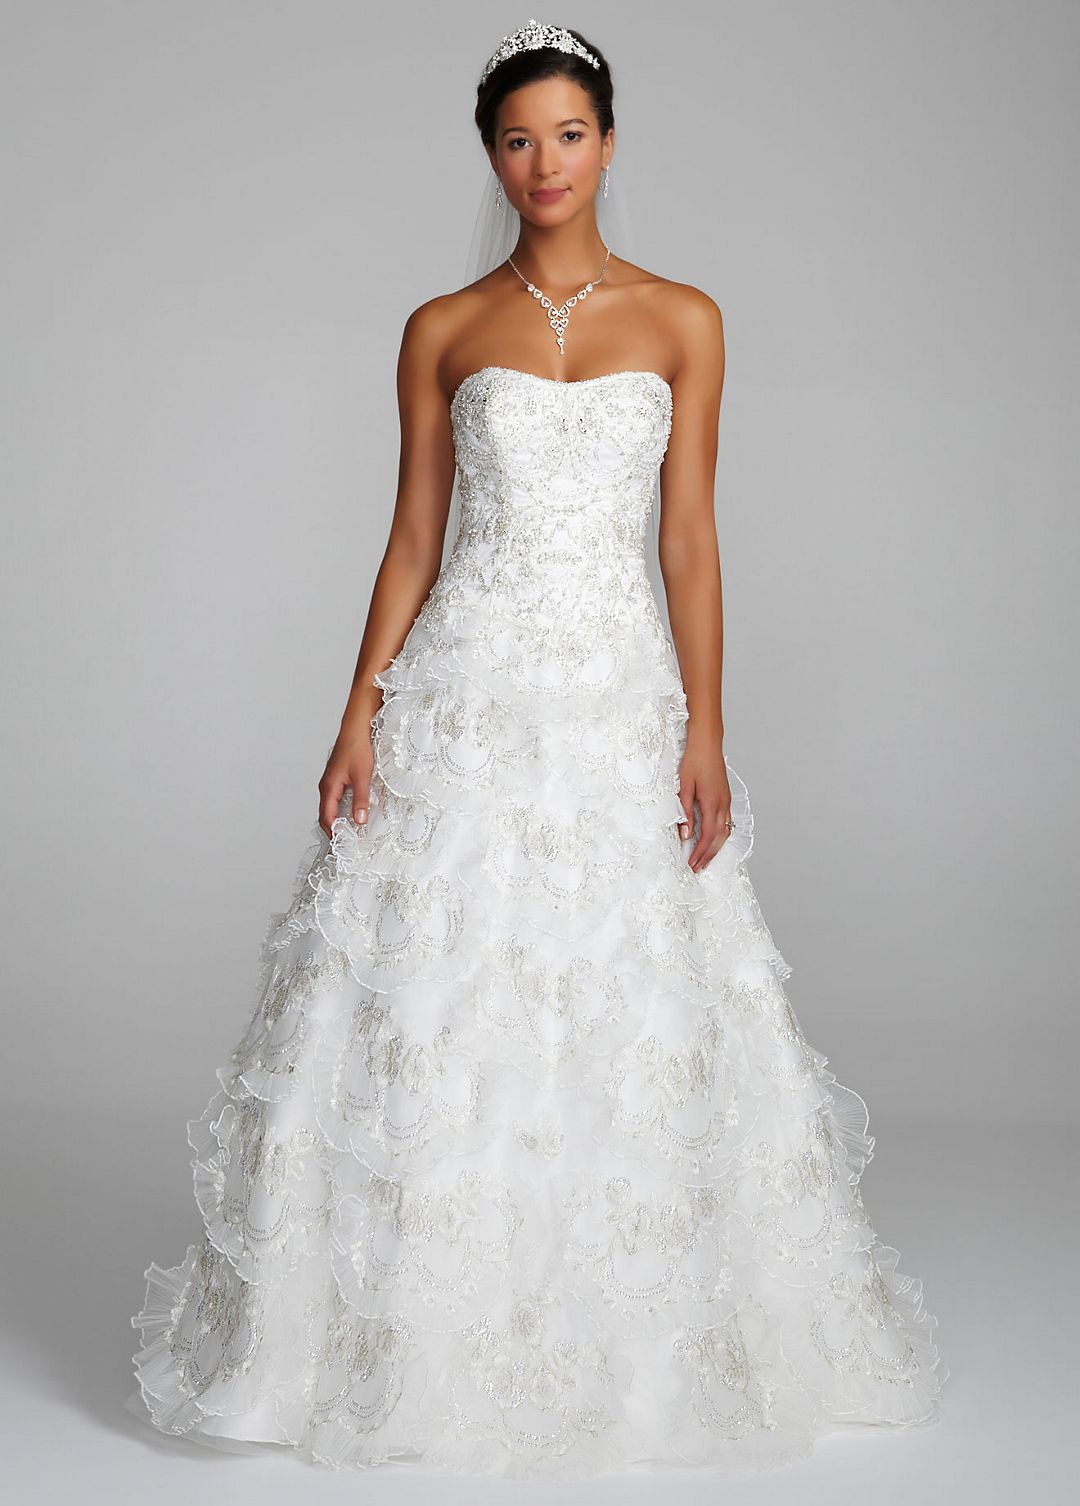 Beaded Wedding Gown with Tiered Scallop Skirt Image 4